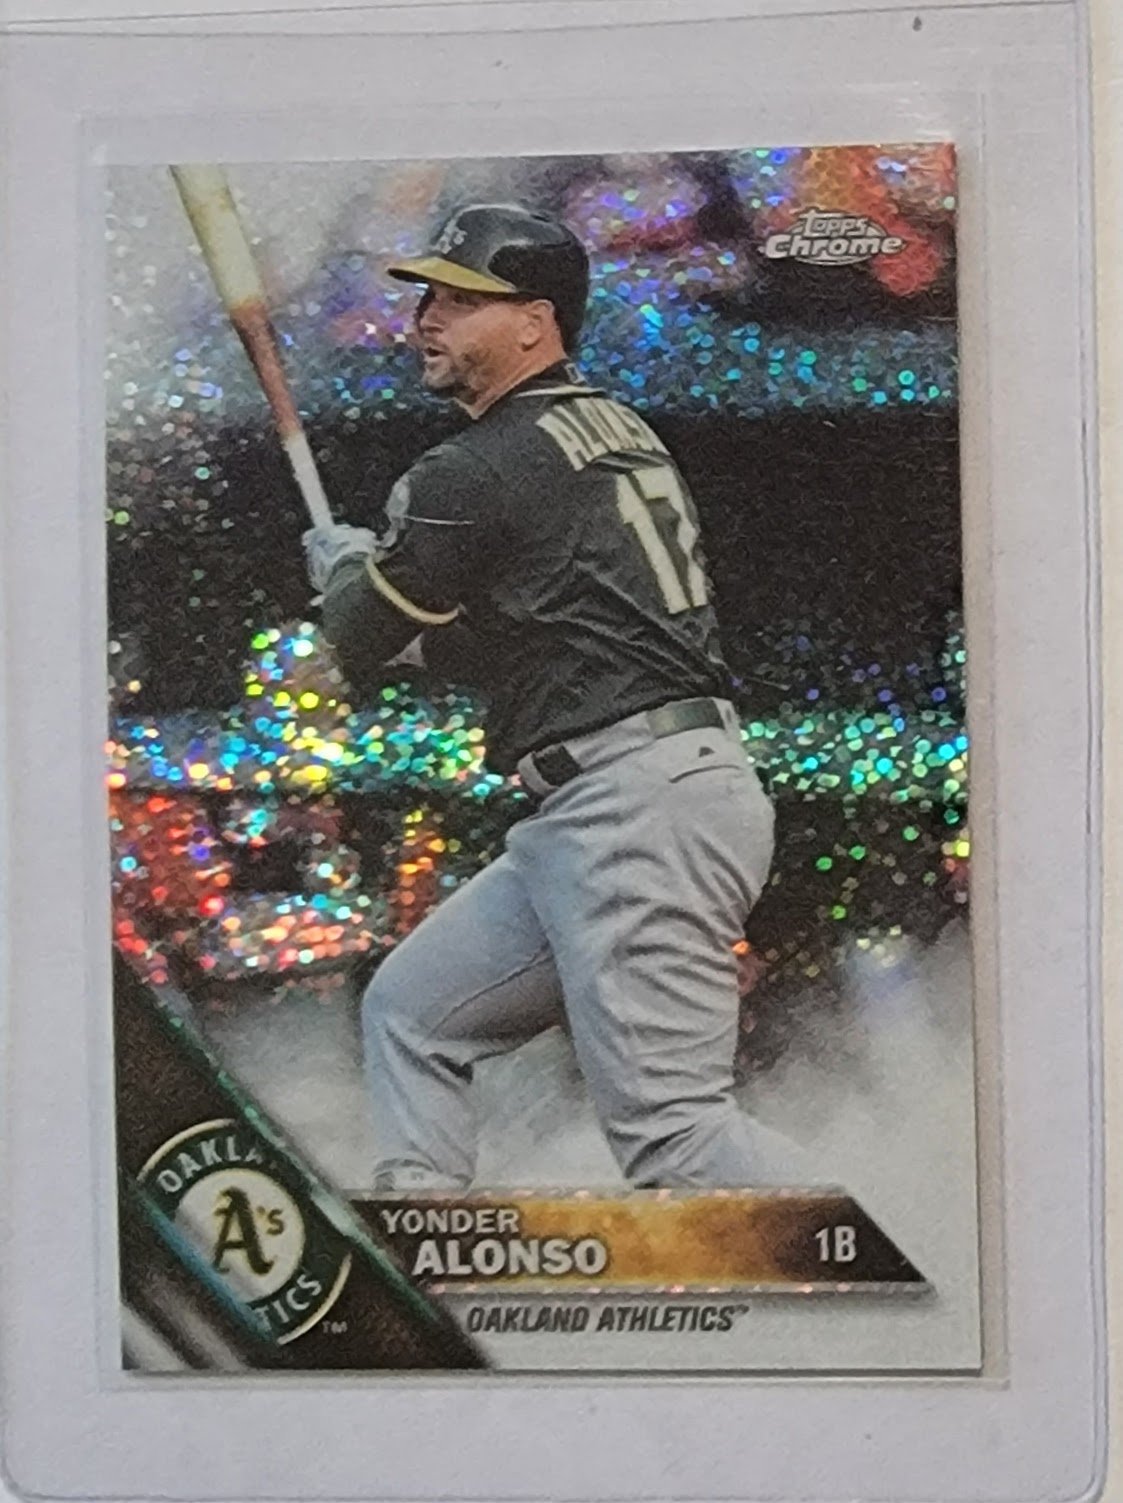 2016 Topps Chrome Update Yonder Alonso Sparkle Refractor Baseball Card TPTV simple Xclusive Collectibles   